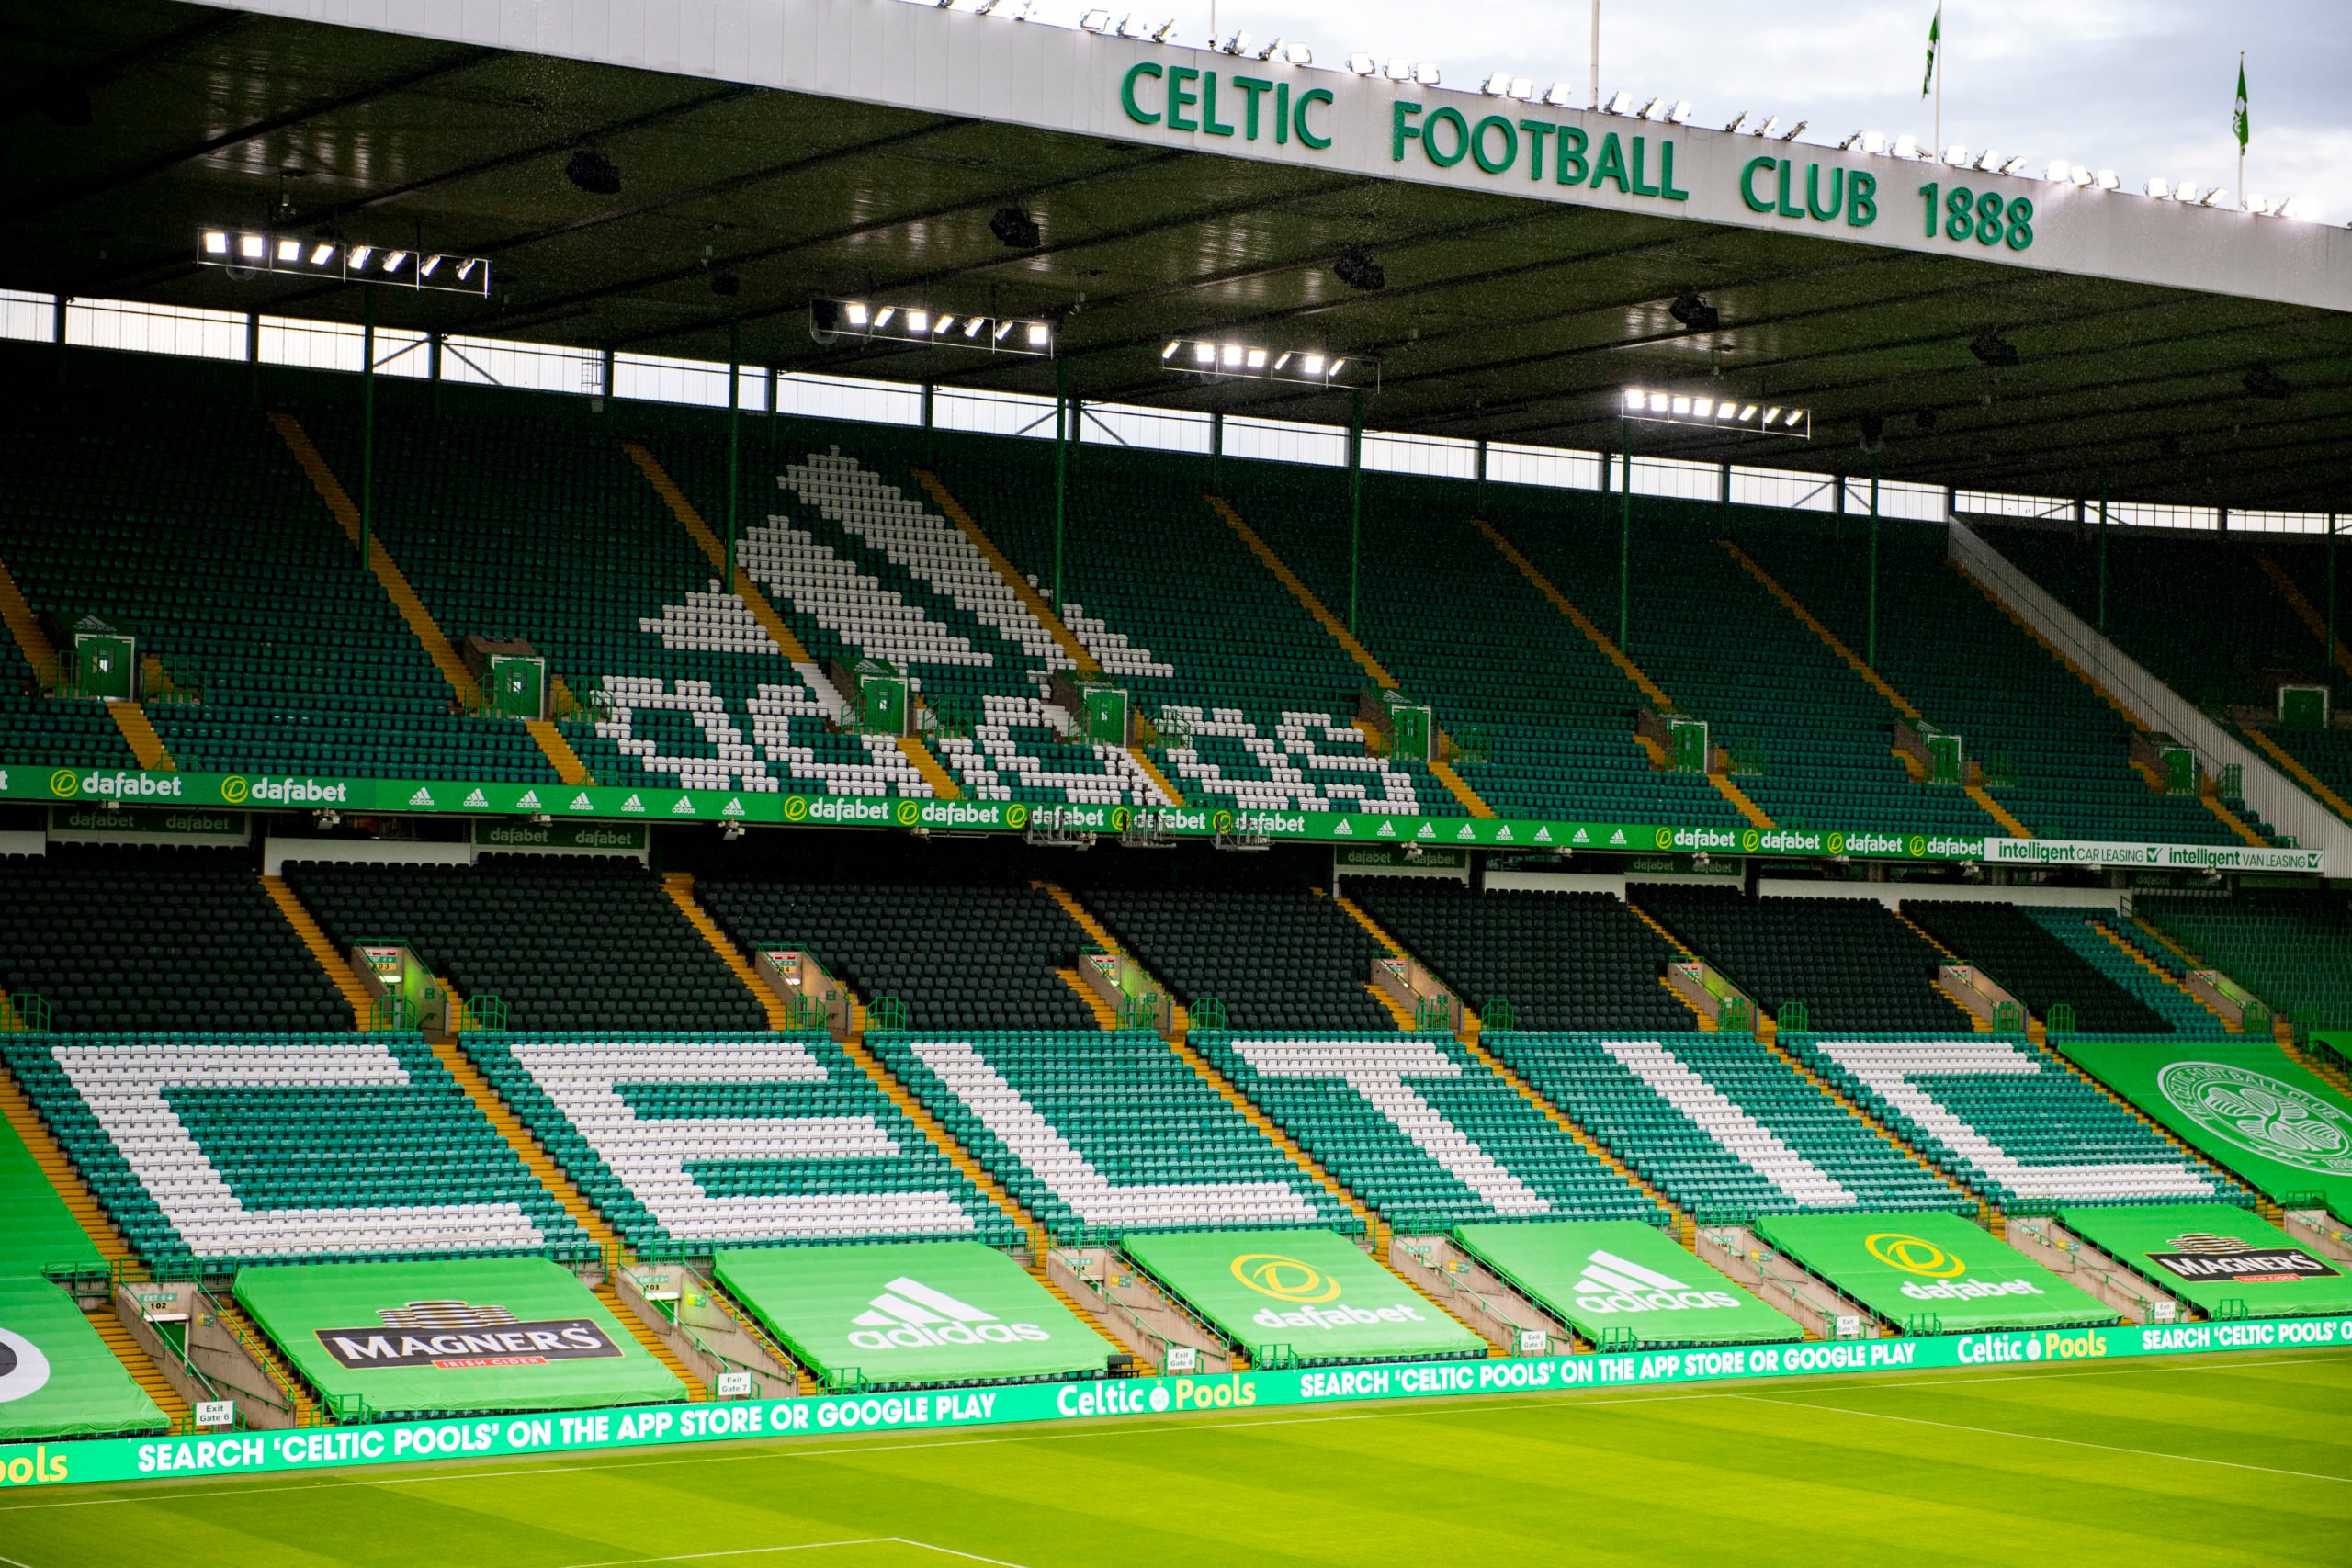 Celtic to reveal new website "in the coming days", what we can expect to see